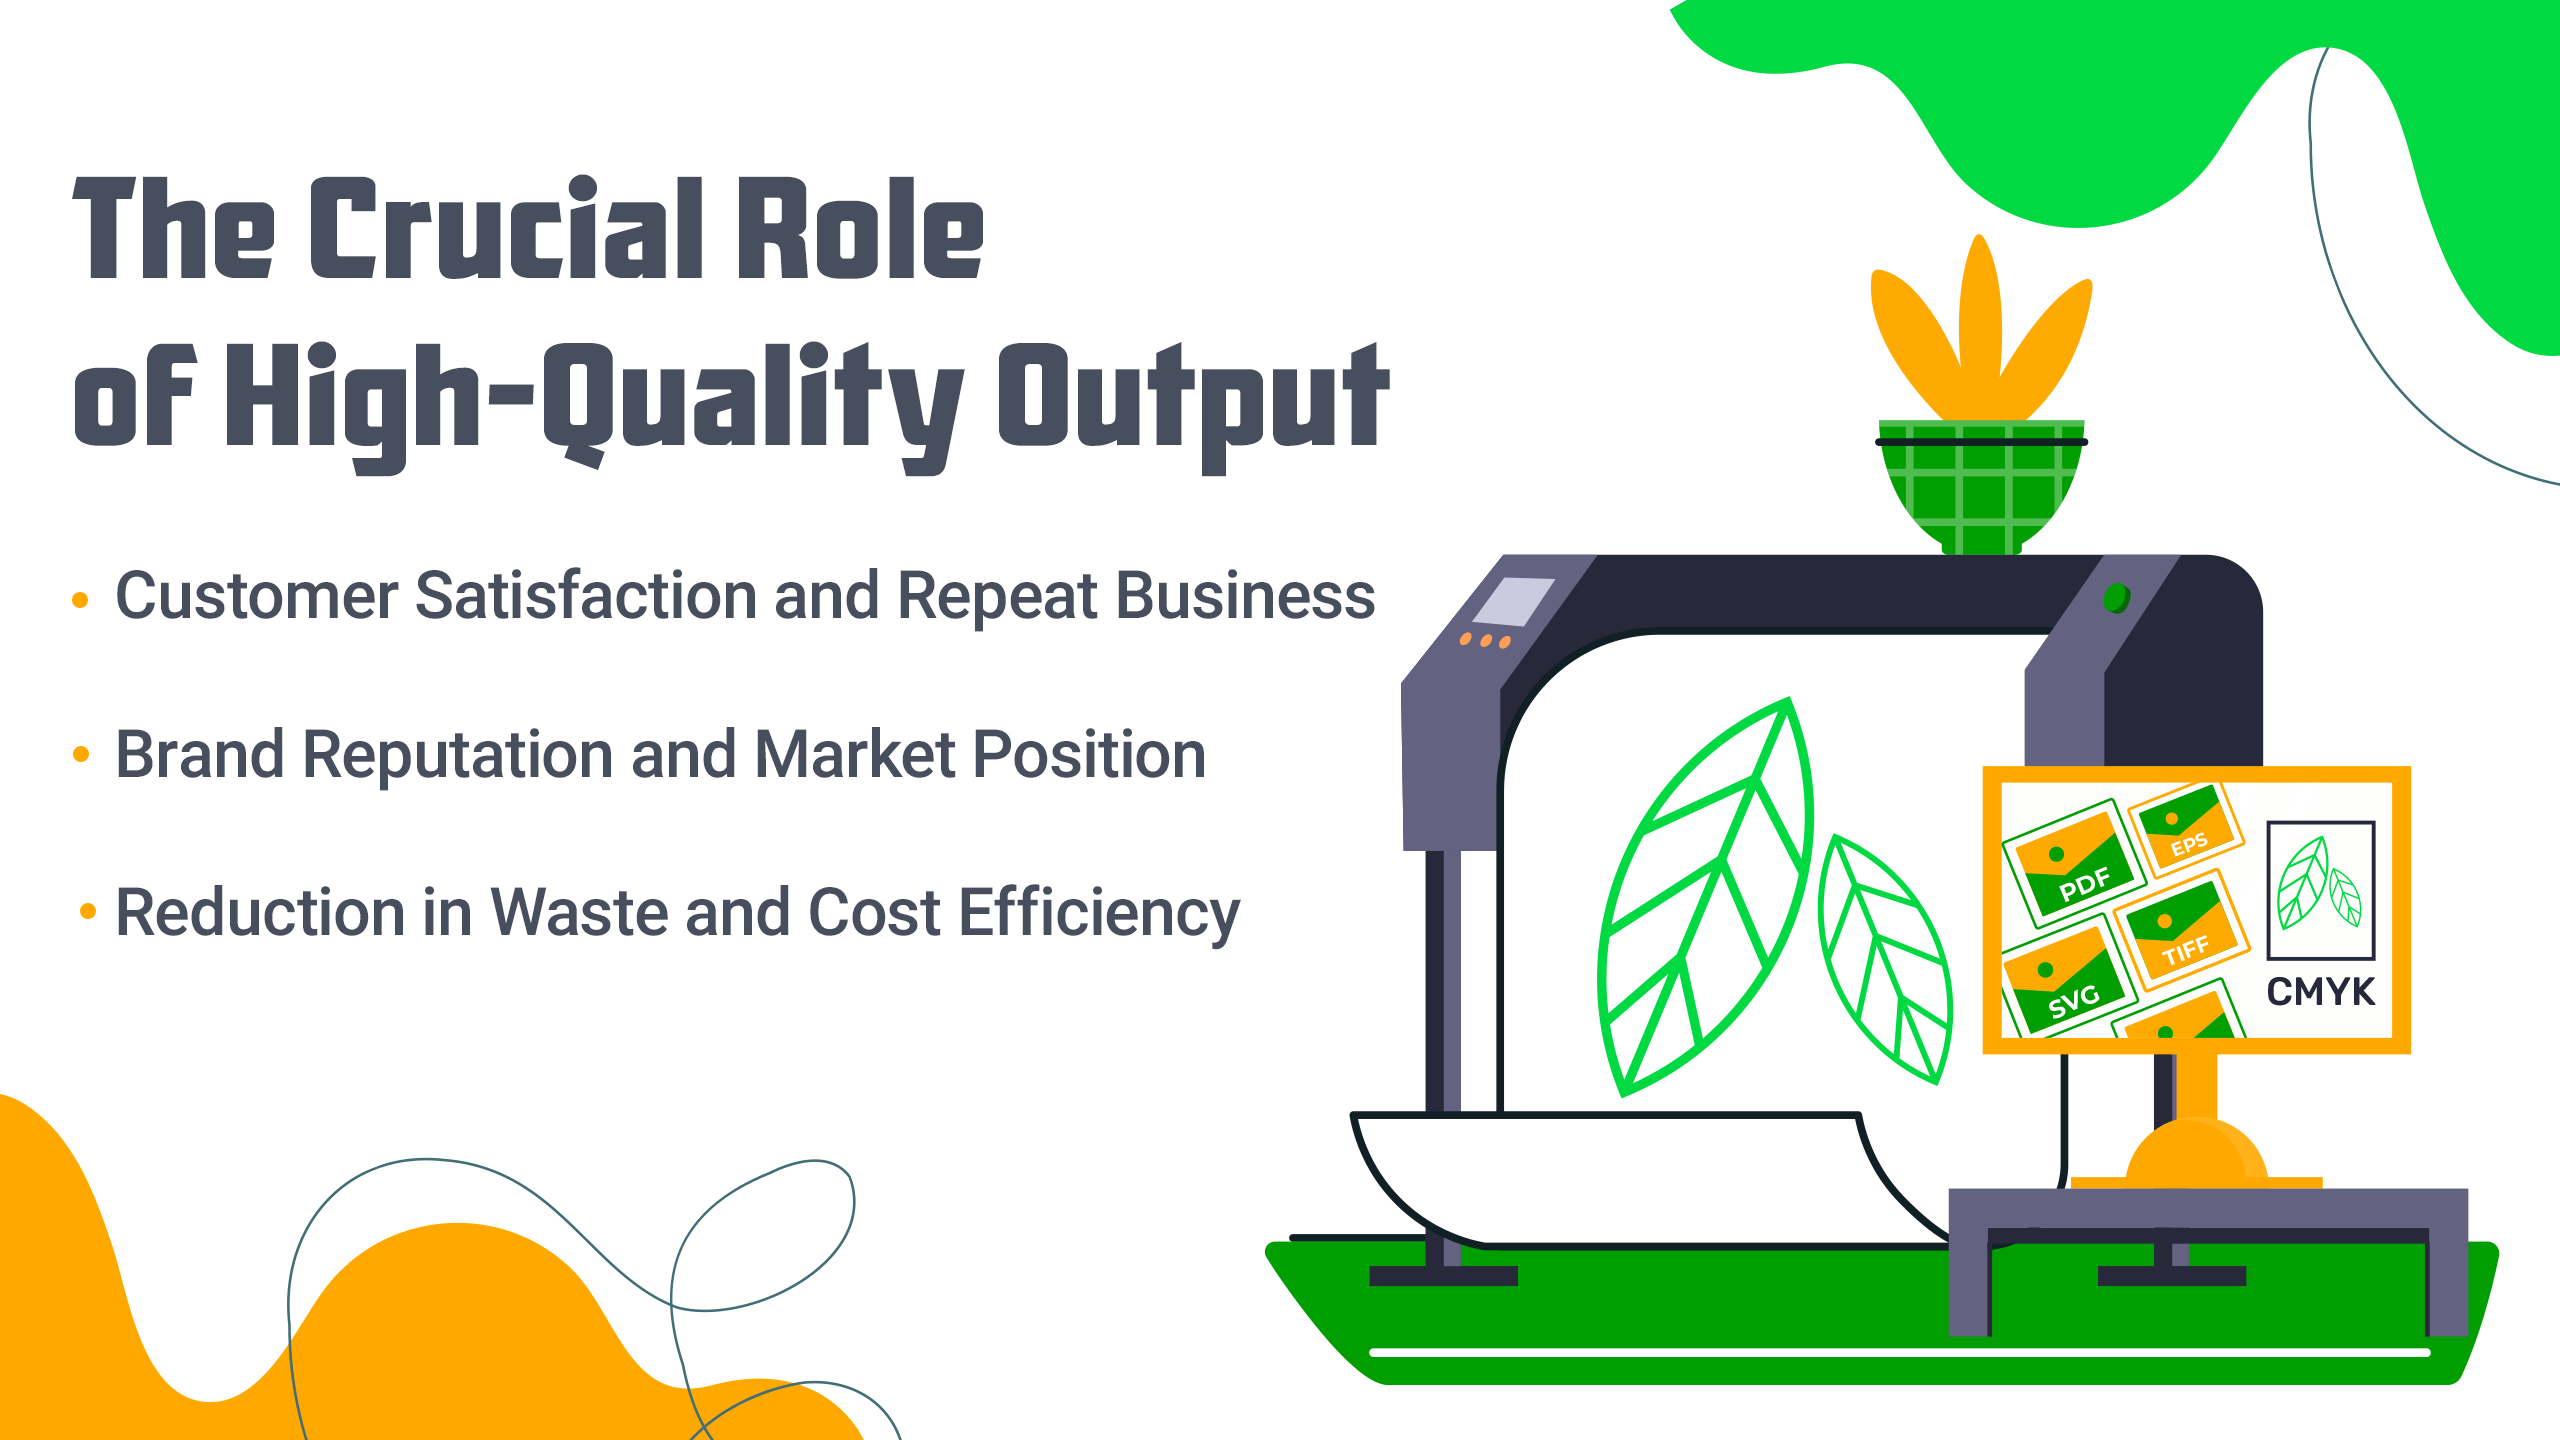 The Crucial Role of High-Quality Output